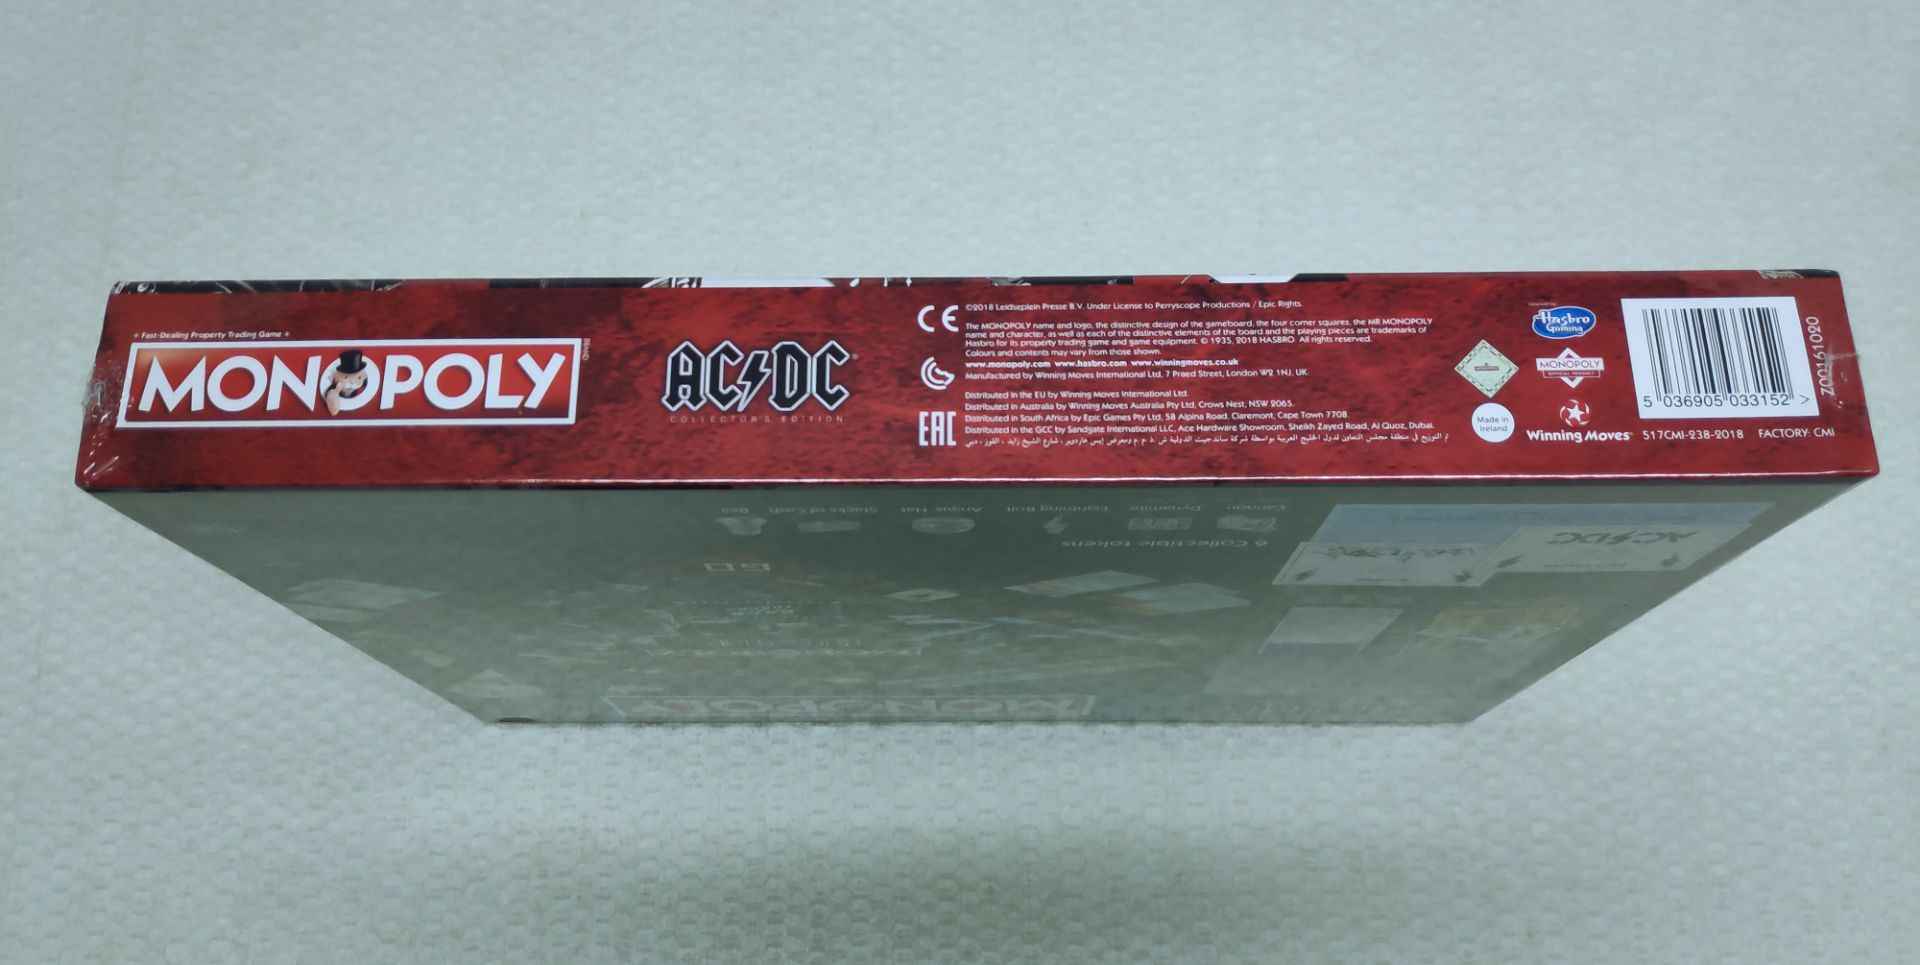 1 x AC/DC Collector's Edition Monopoly - New/Sealed - CL720 - Location: Altrincham WA14<BR - Image 7 of 8